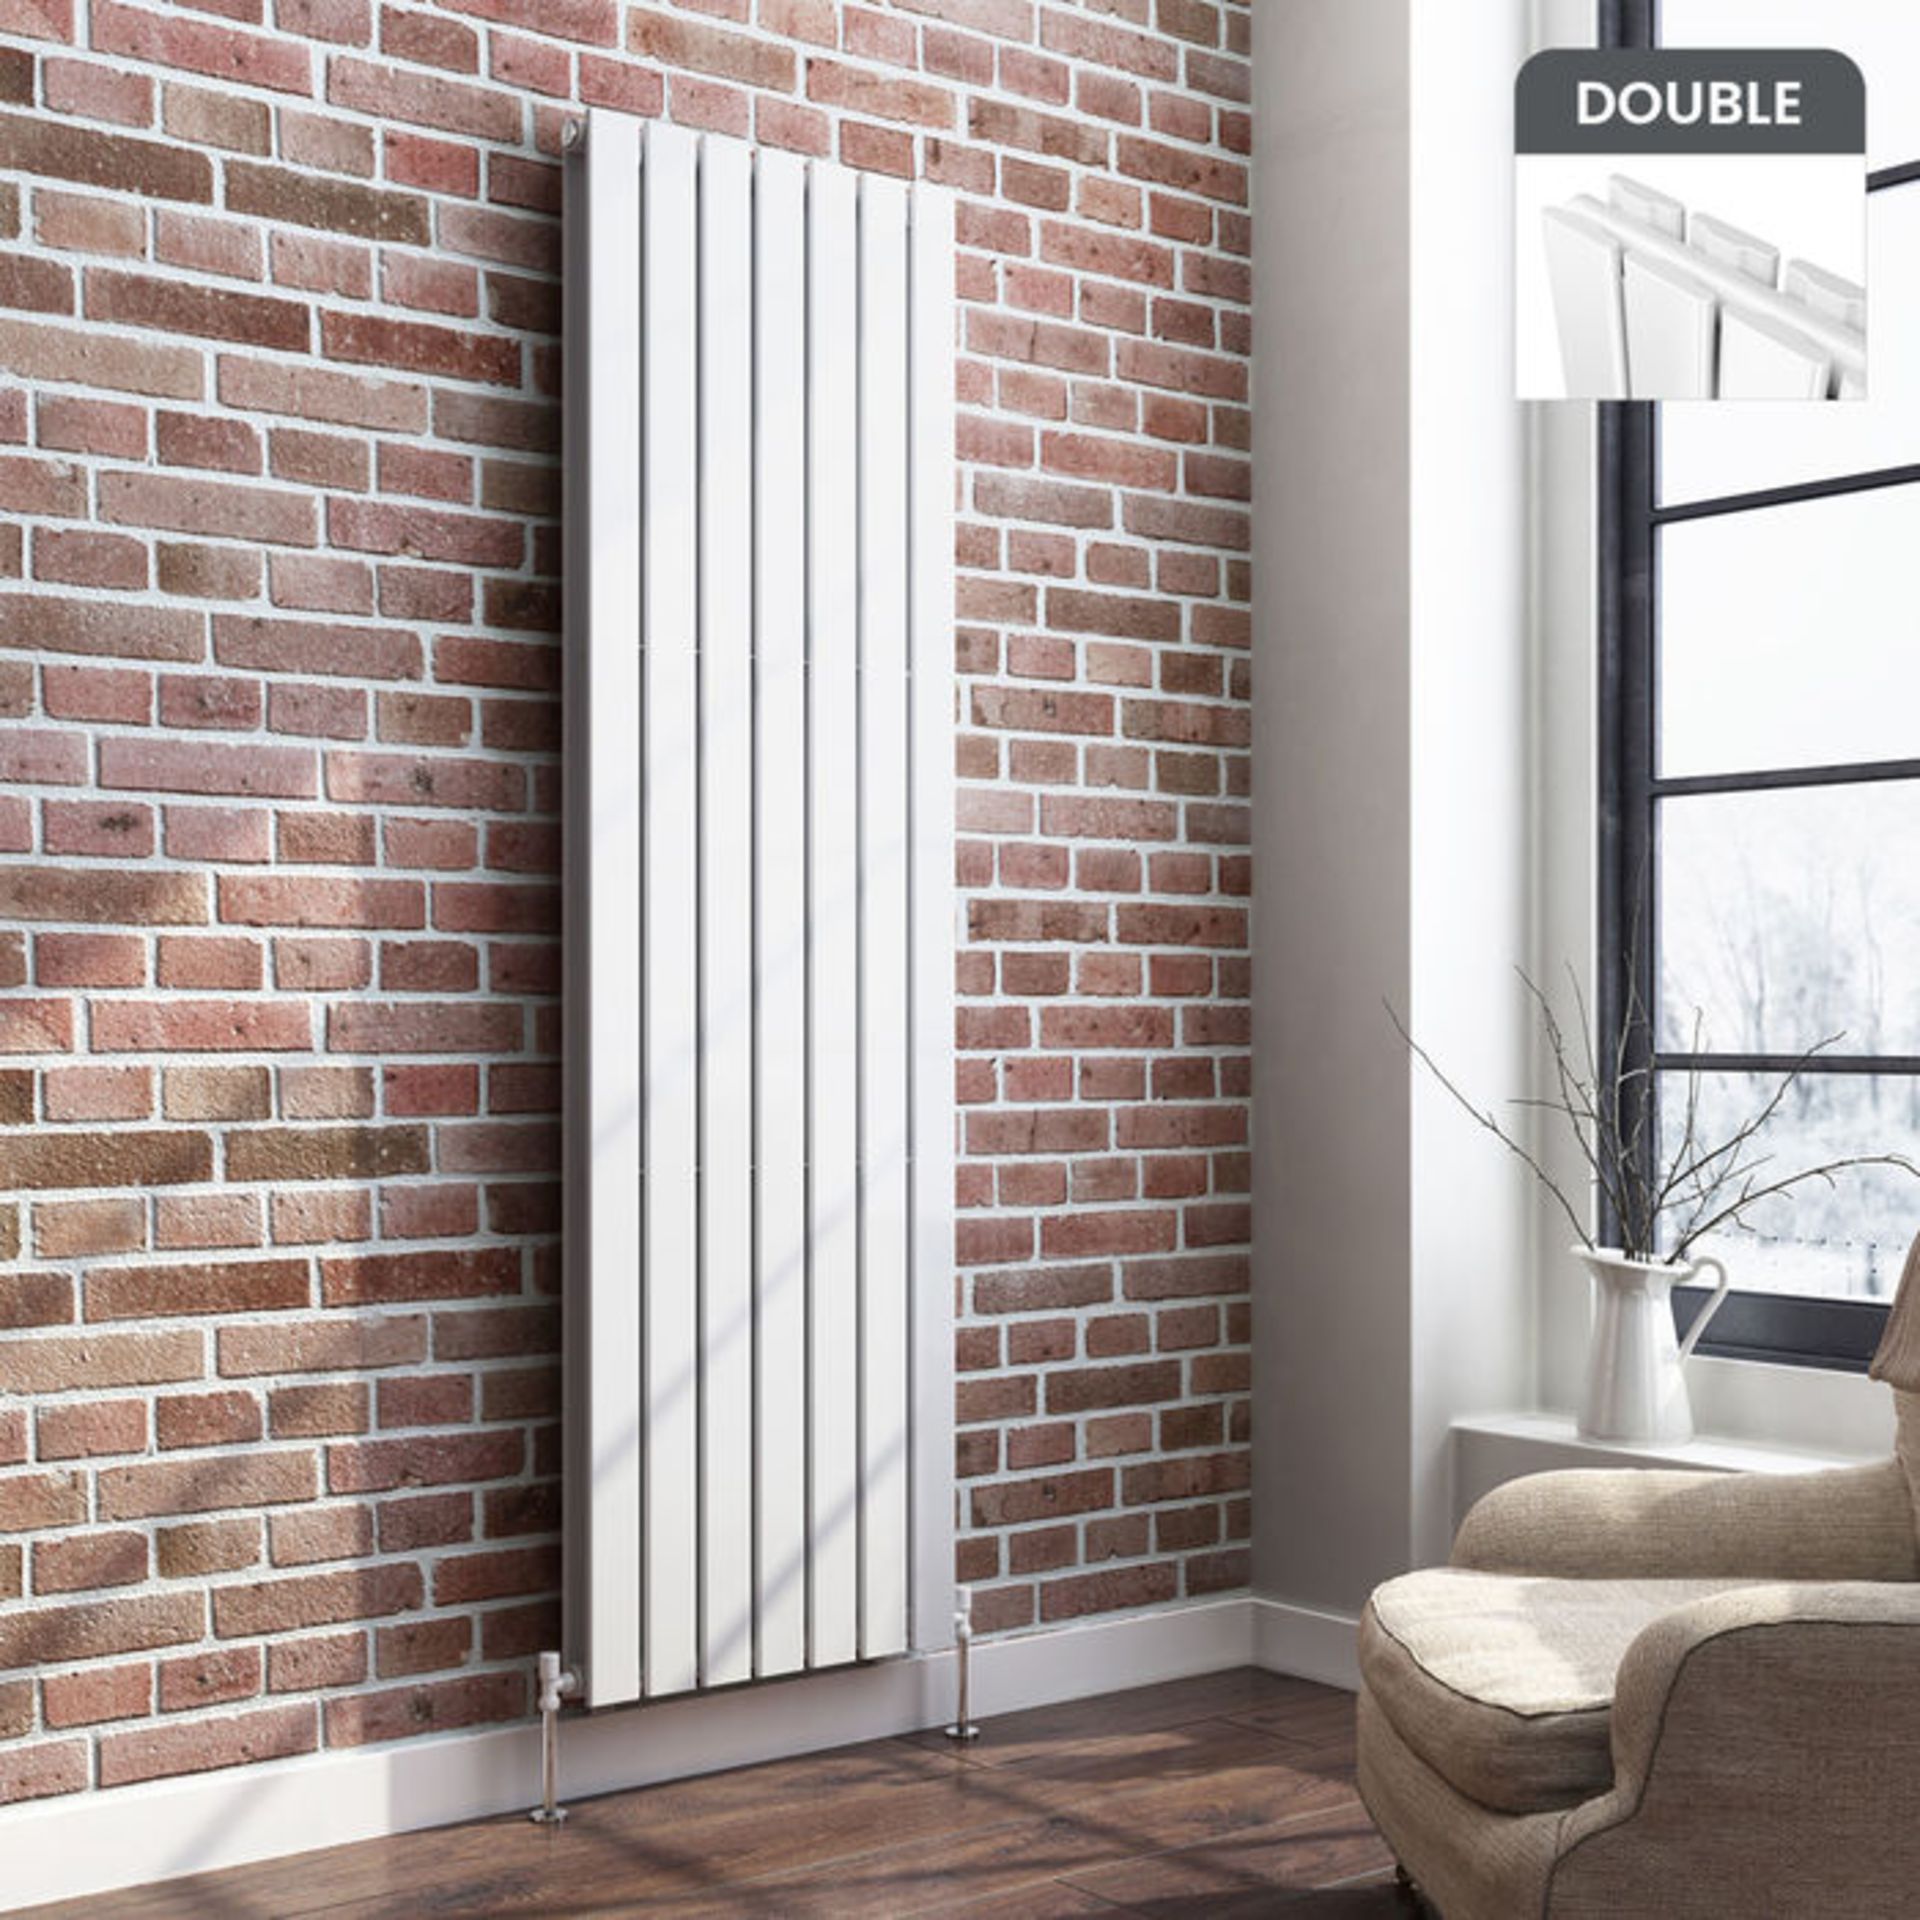 (TA20) 1800x532mm Gloss White Double Flat Panel Vertical Radiator. RRP £499.99. Made from high